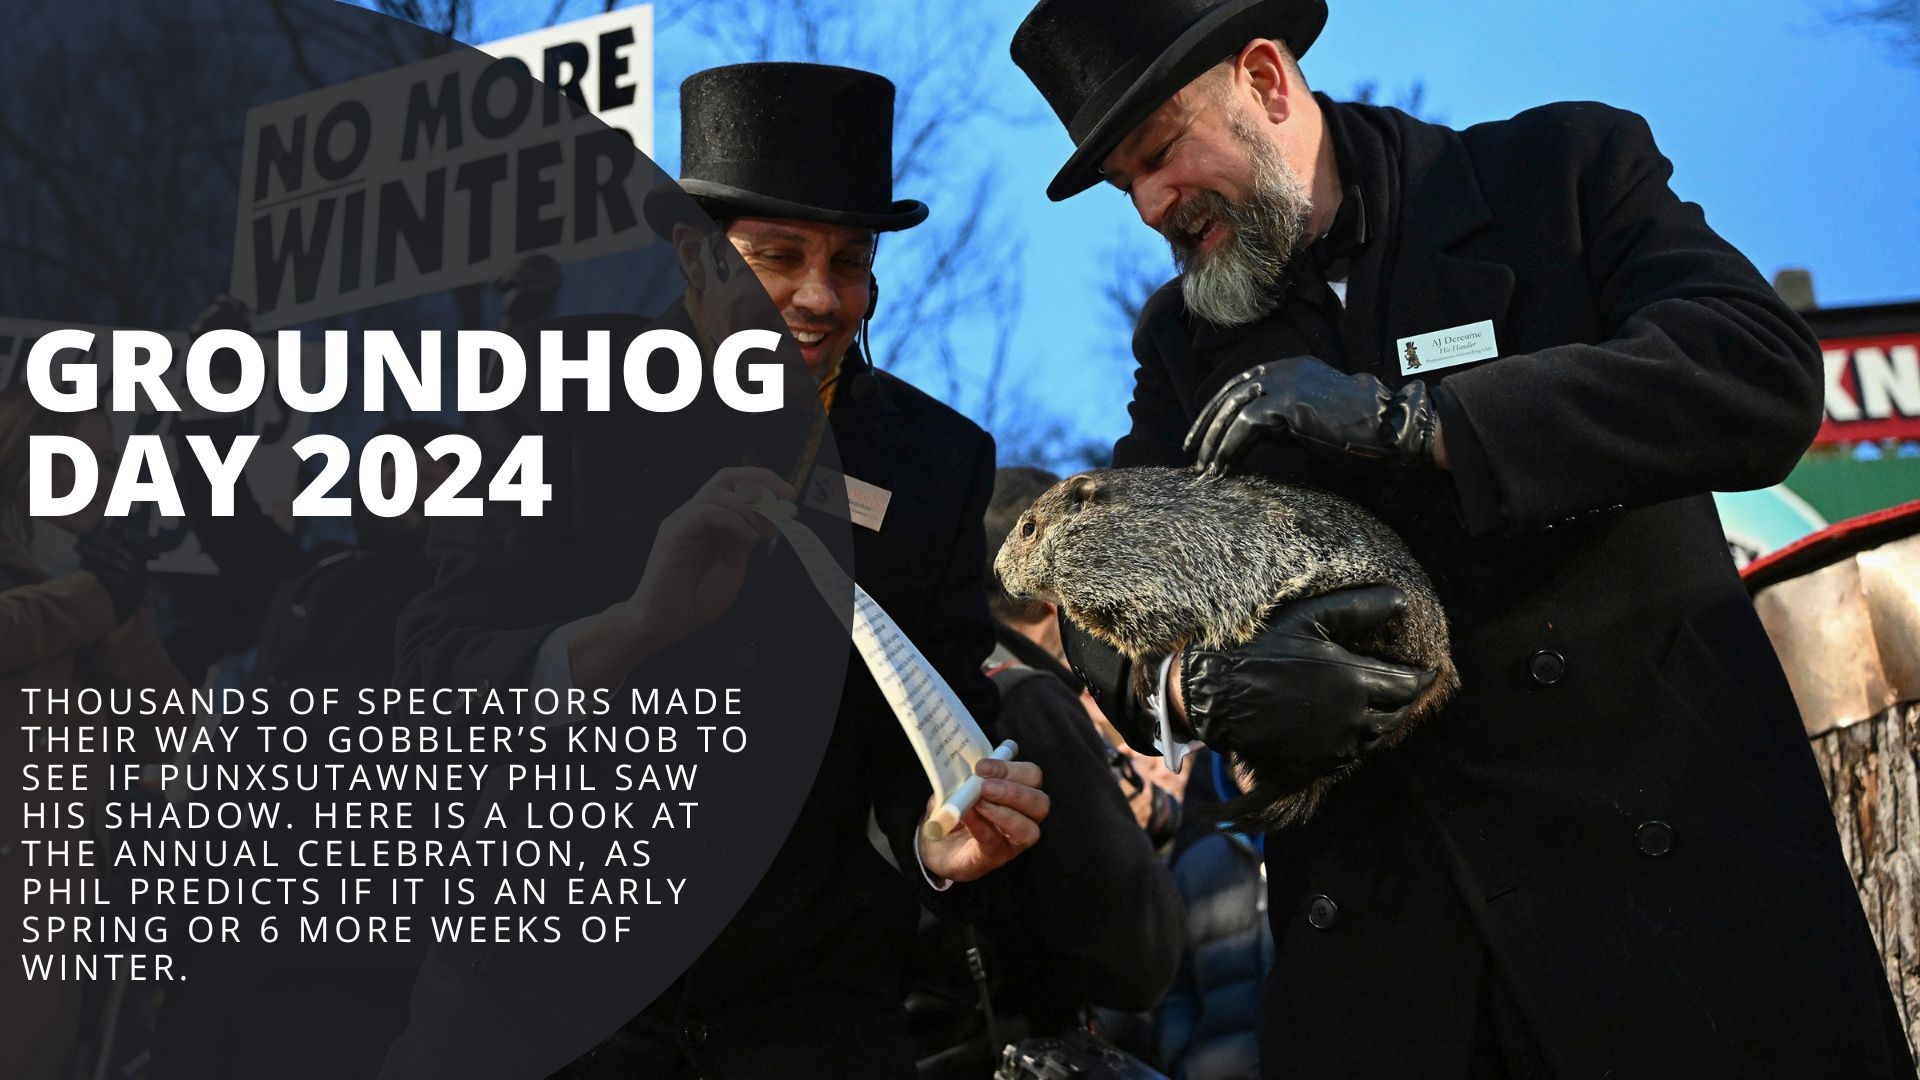 Thousands of spectators made their way to Gobbler's Knob to see if Punxsutawney Phil saw his shadow. Here is a look at the annual celebration.